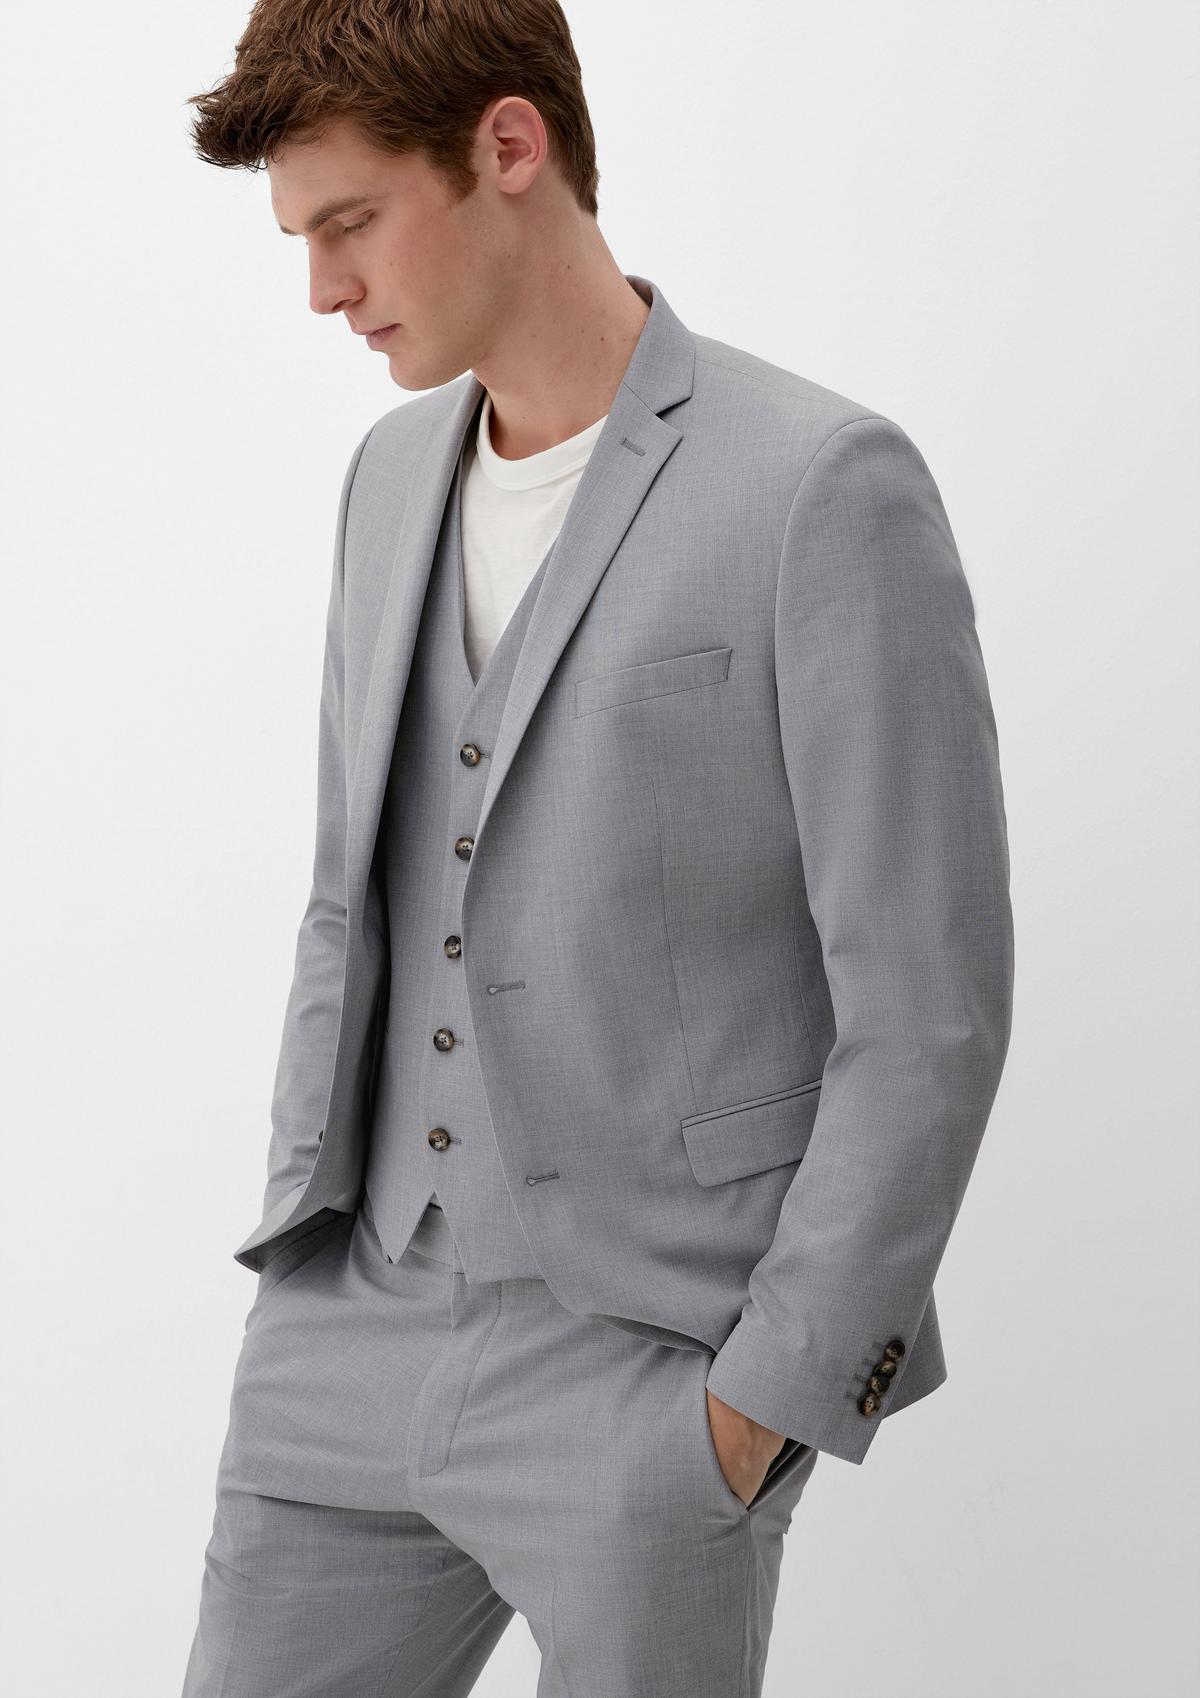 s.Oliver Sports jacket in a slim fit